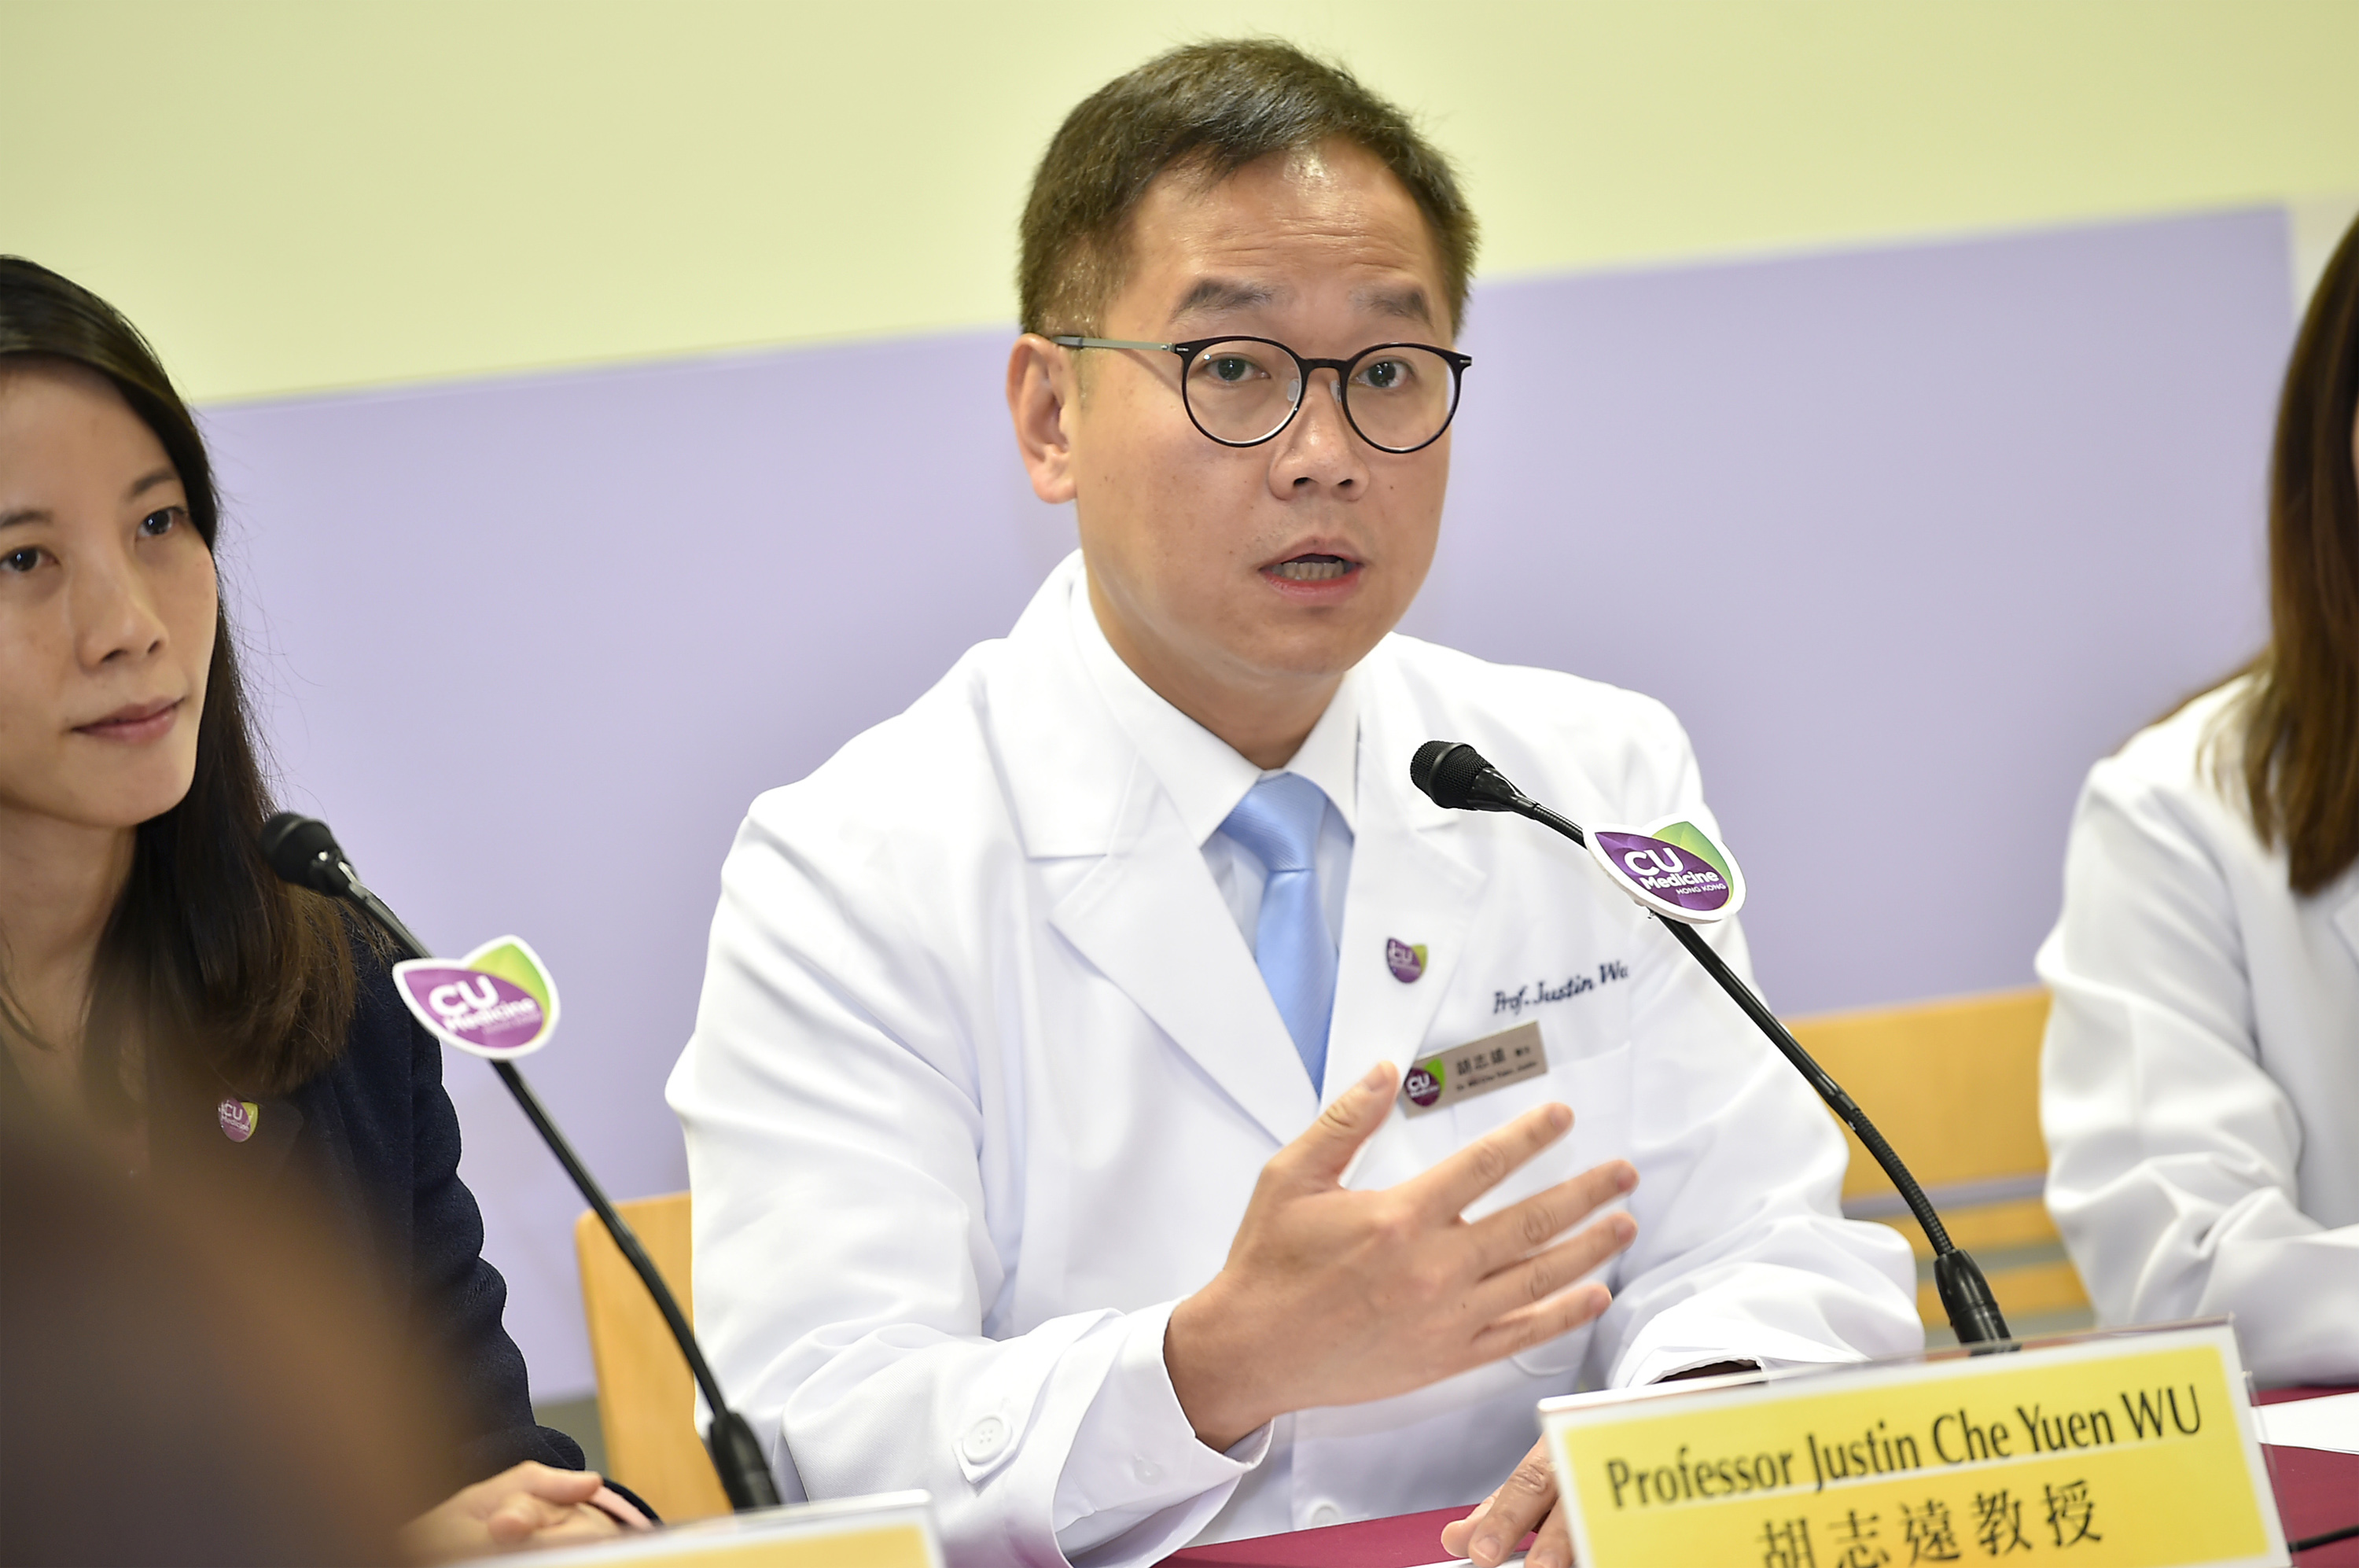 Professor Justin WU reminds that a small proportion of patients may experience side effects after taking TCAs. As such, the treatment should be administered under doctors’ supervision after proper assessment.